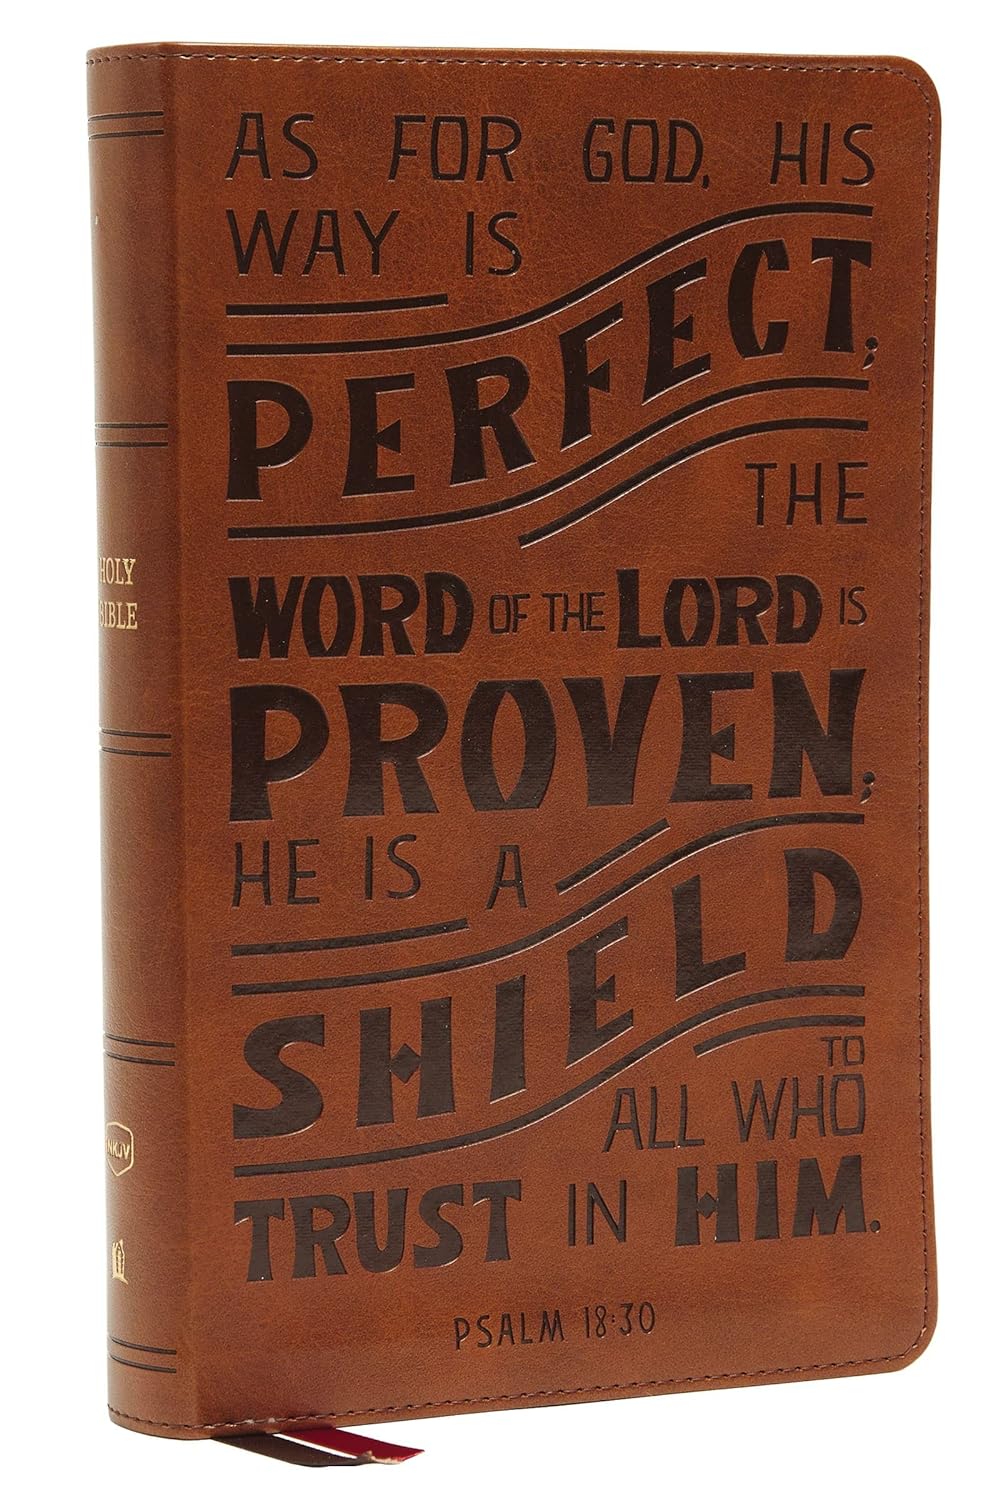 NKJV Personal Size Reference, Verse Art Cover Collection, Leathersoft Tan